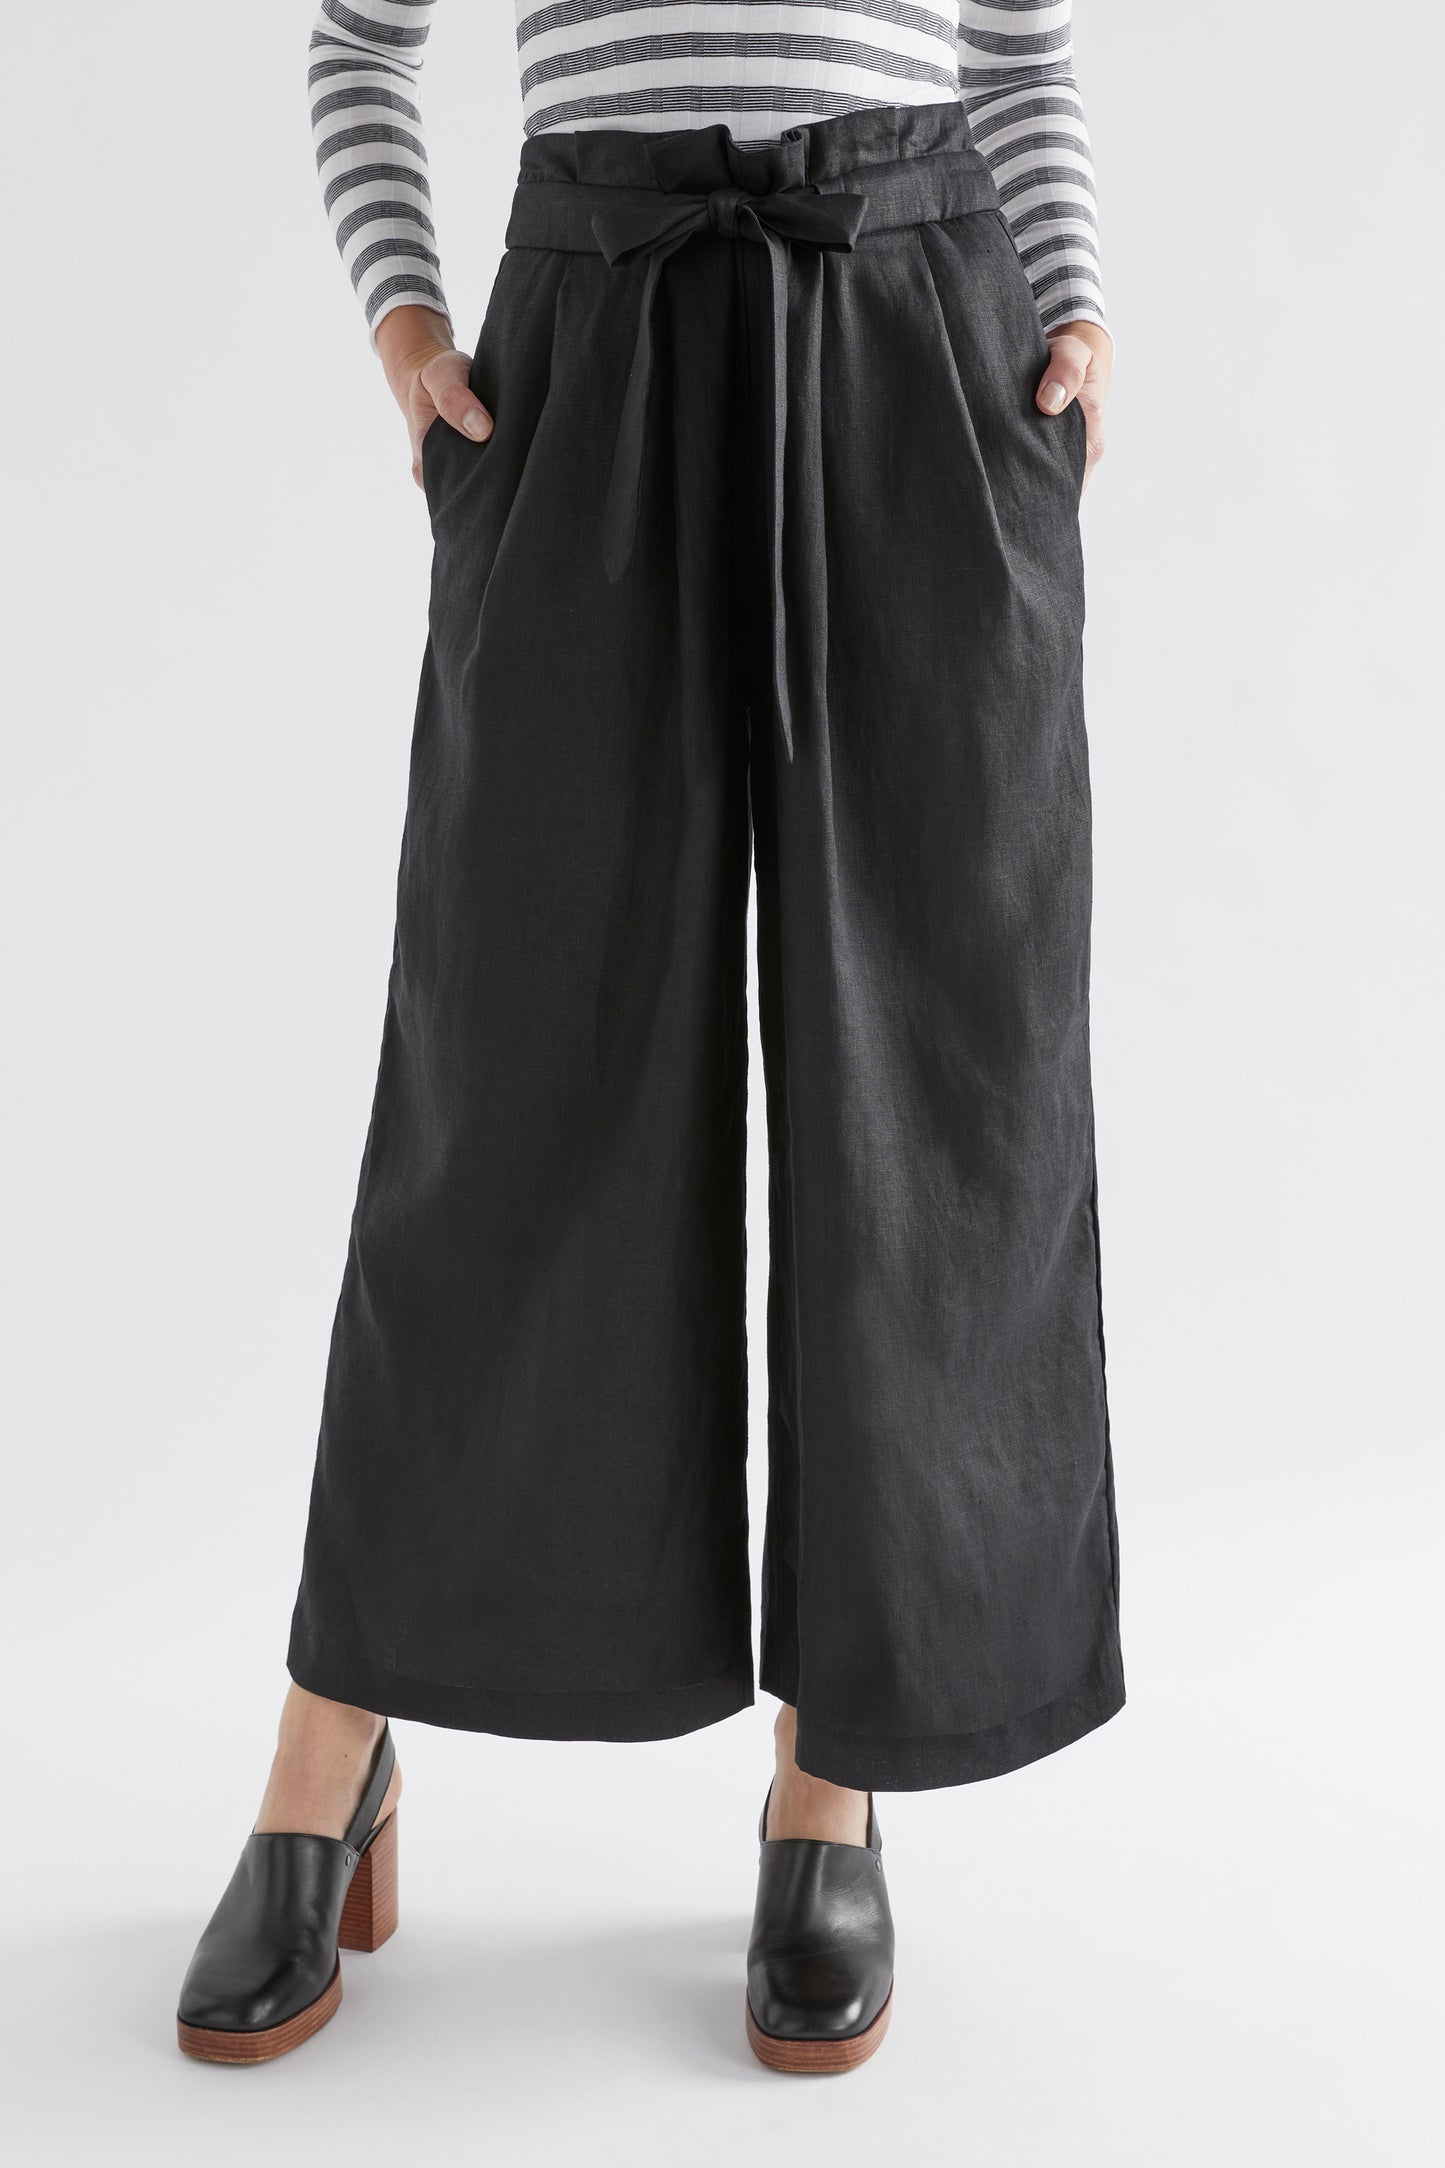 Colino French Linen High Waist Paper Bag Relaxed Pant Model Front Crop | BLACK